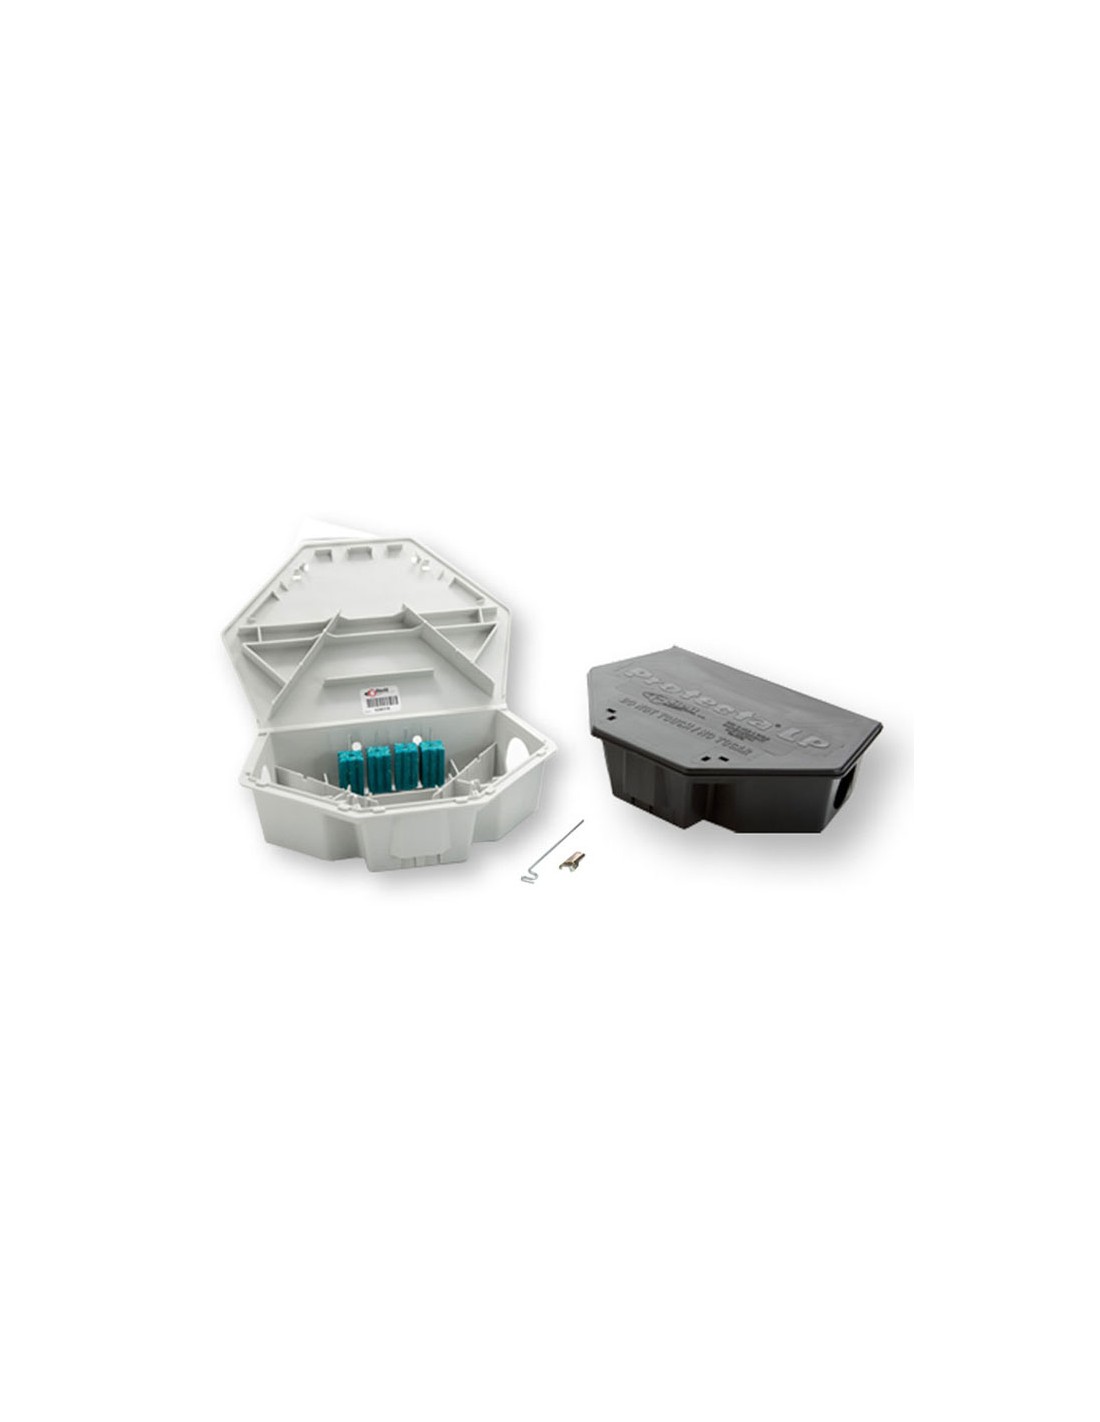 Bell Protecta LP Bait Station